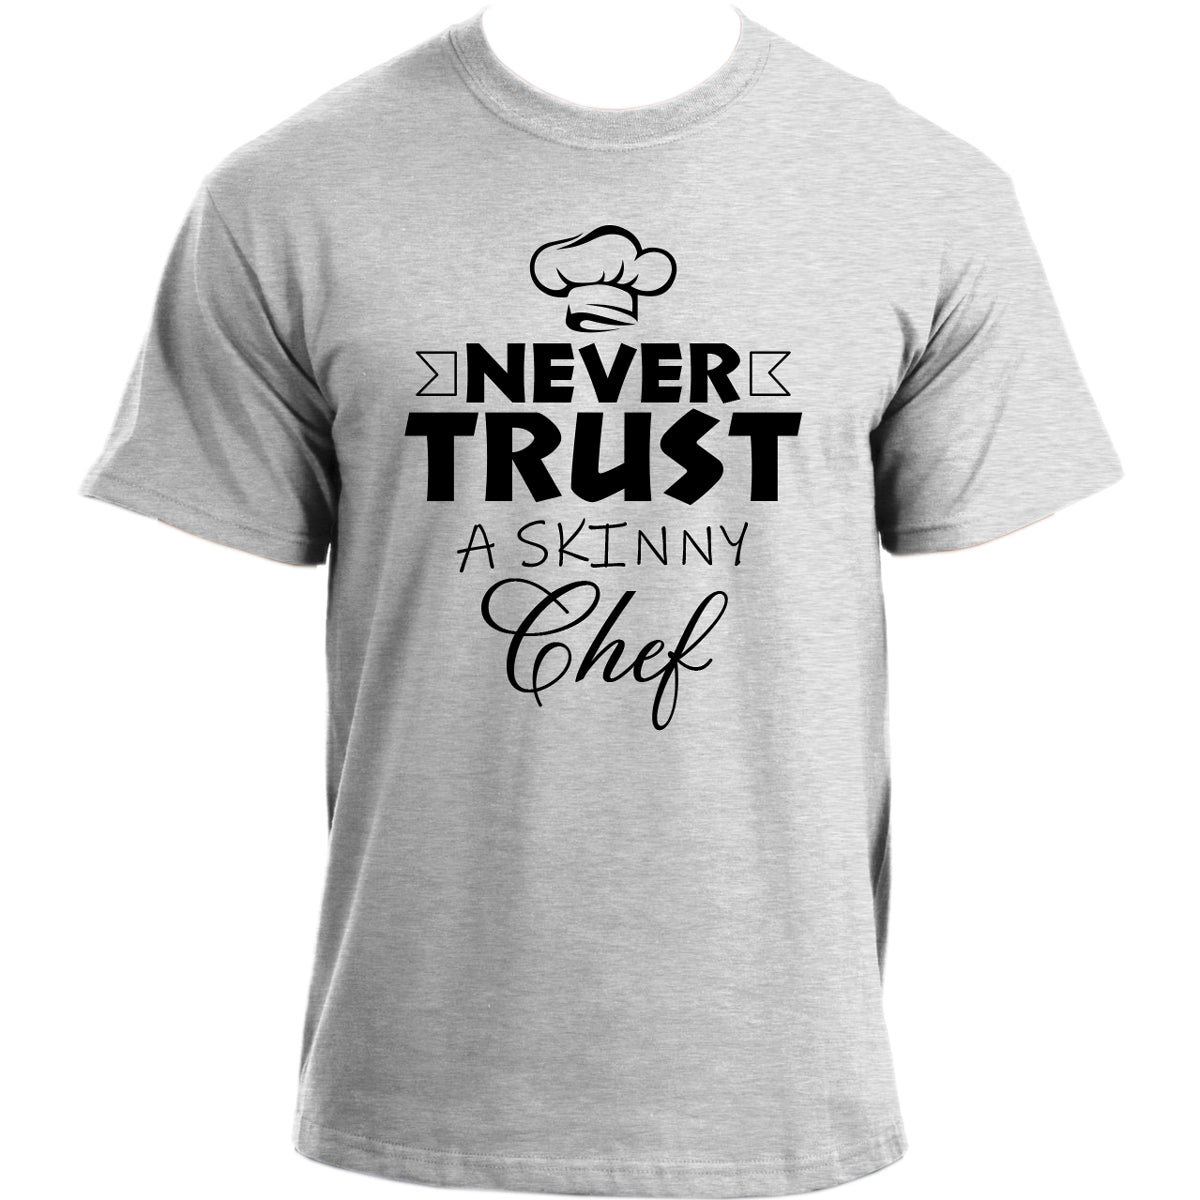 Never Trust a Skinny Chef Funny T-Shirt for Men â€“ Novelty Funny Chef T Shirt